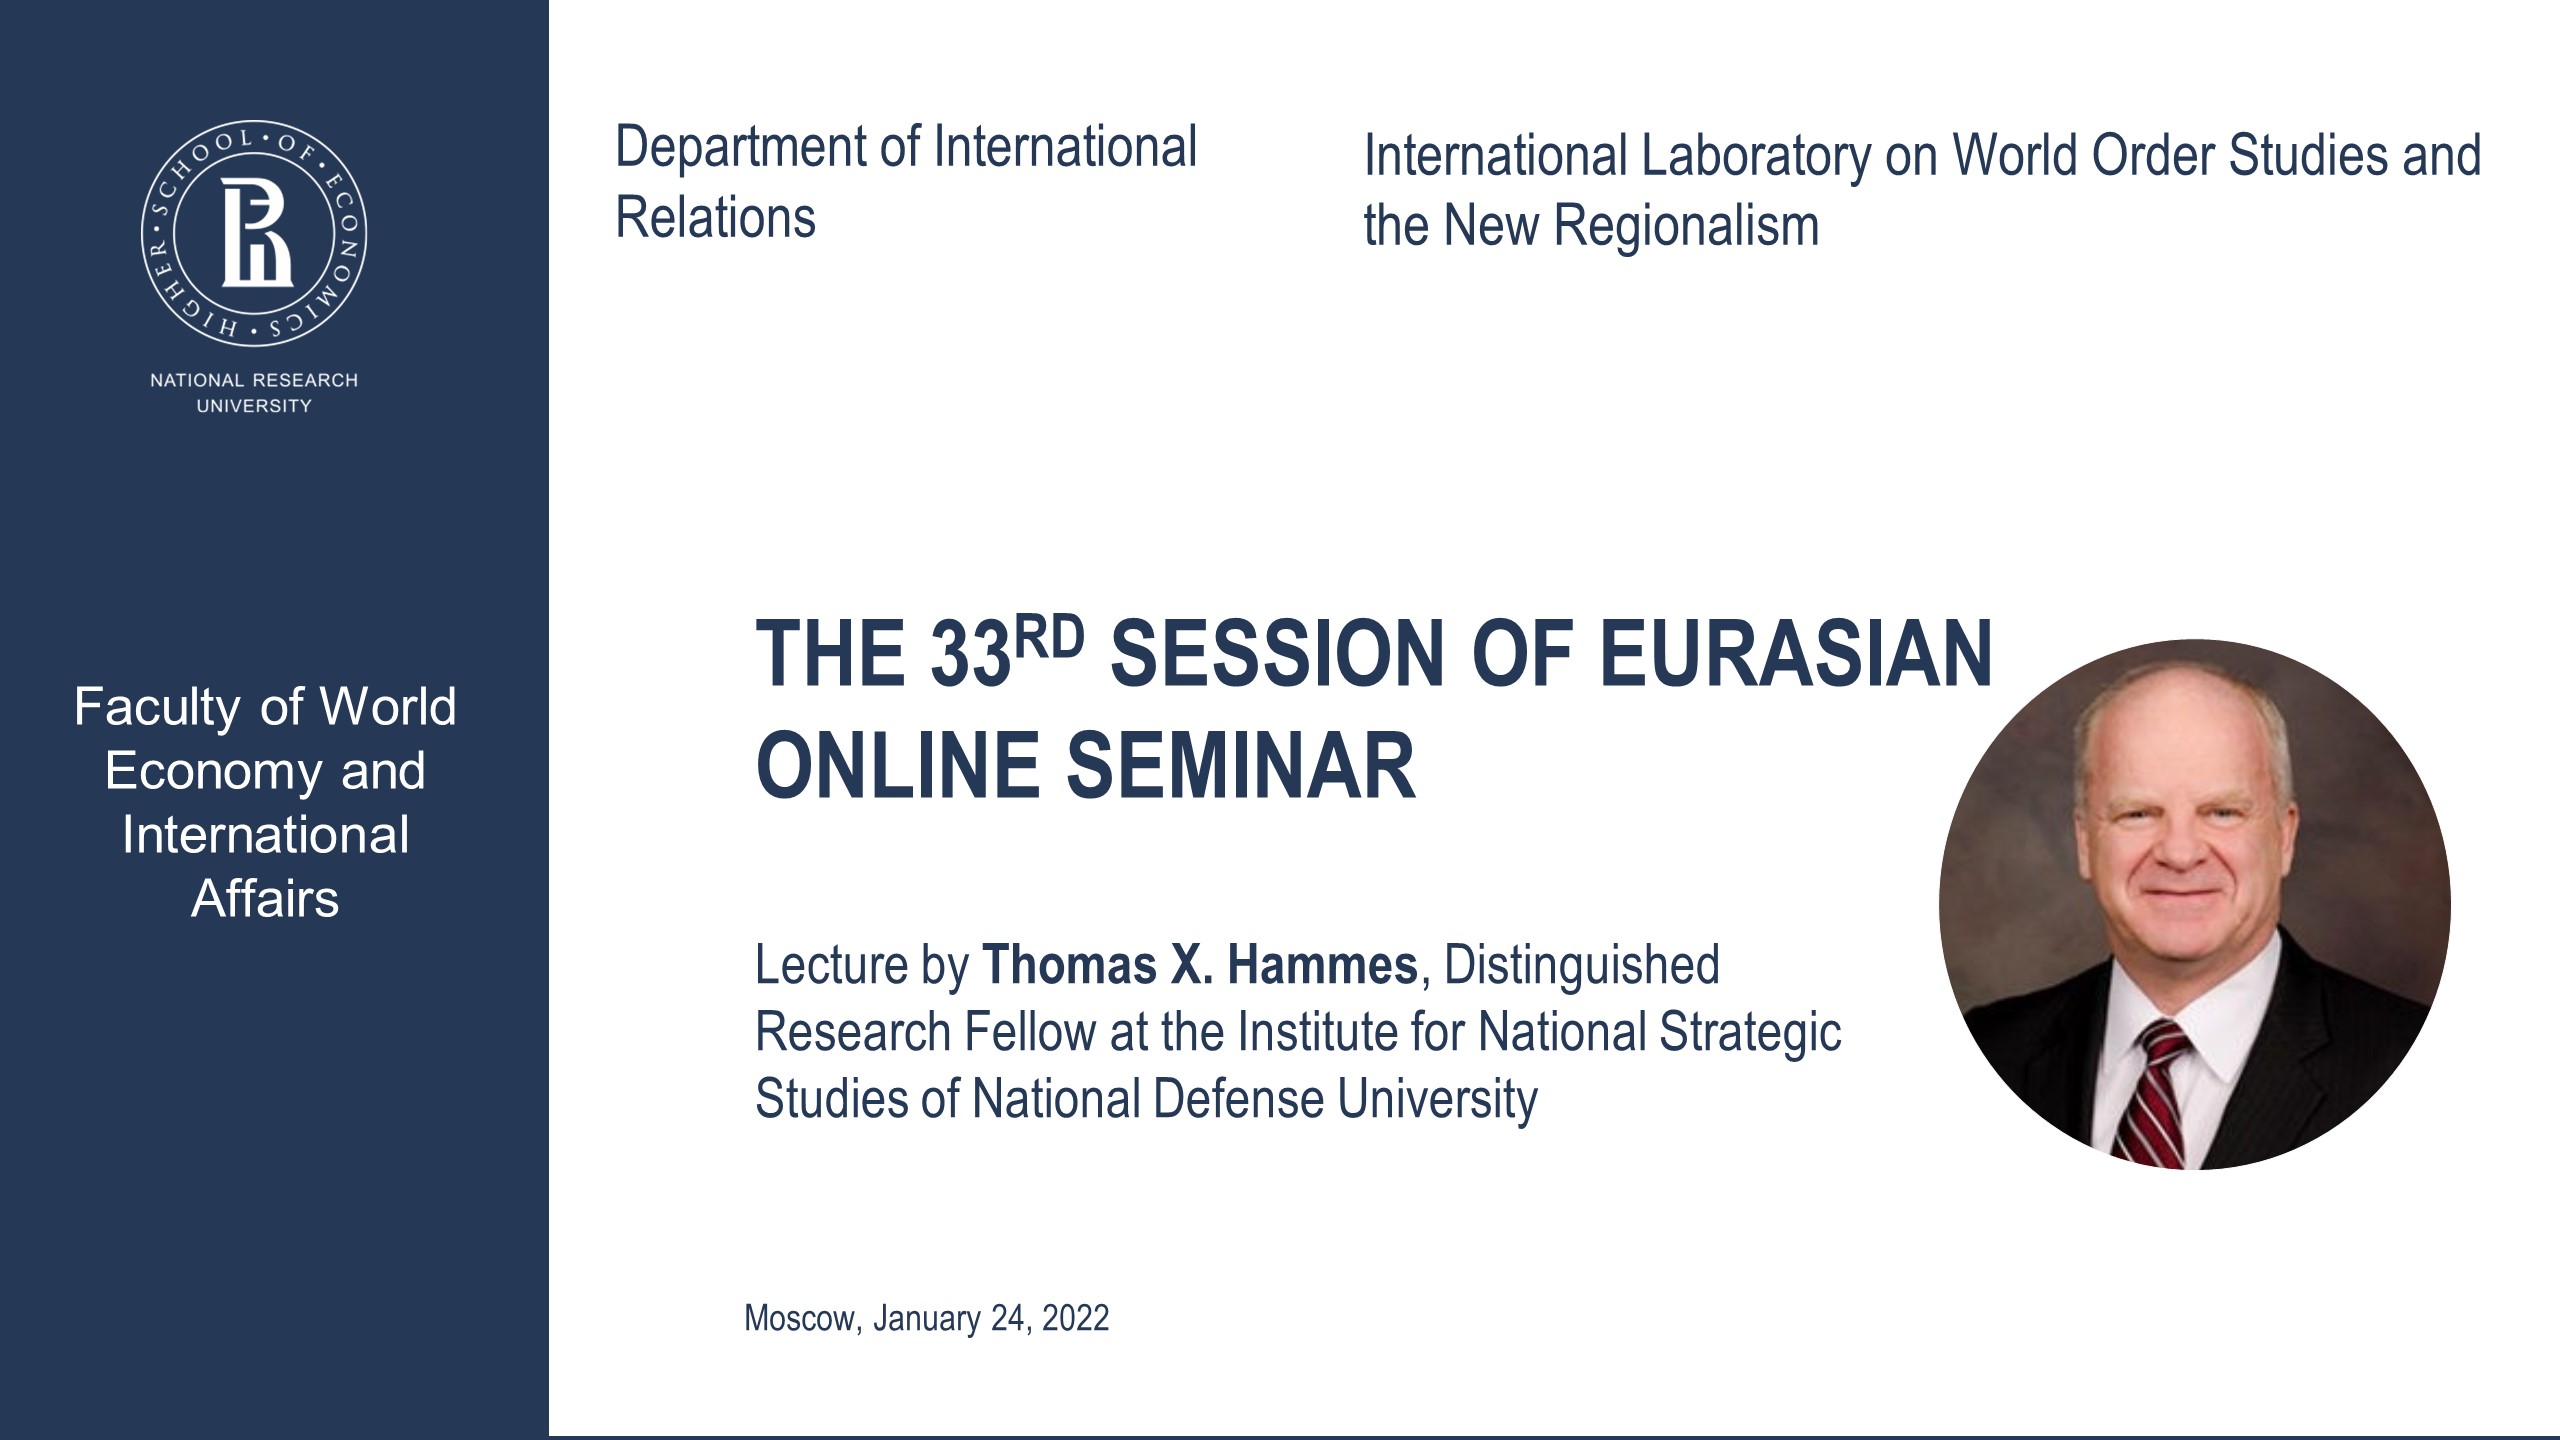 The 33 Session of Eurasian Online Seminar with Thomas X. Hammes